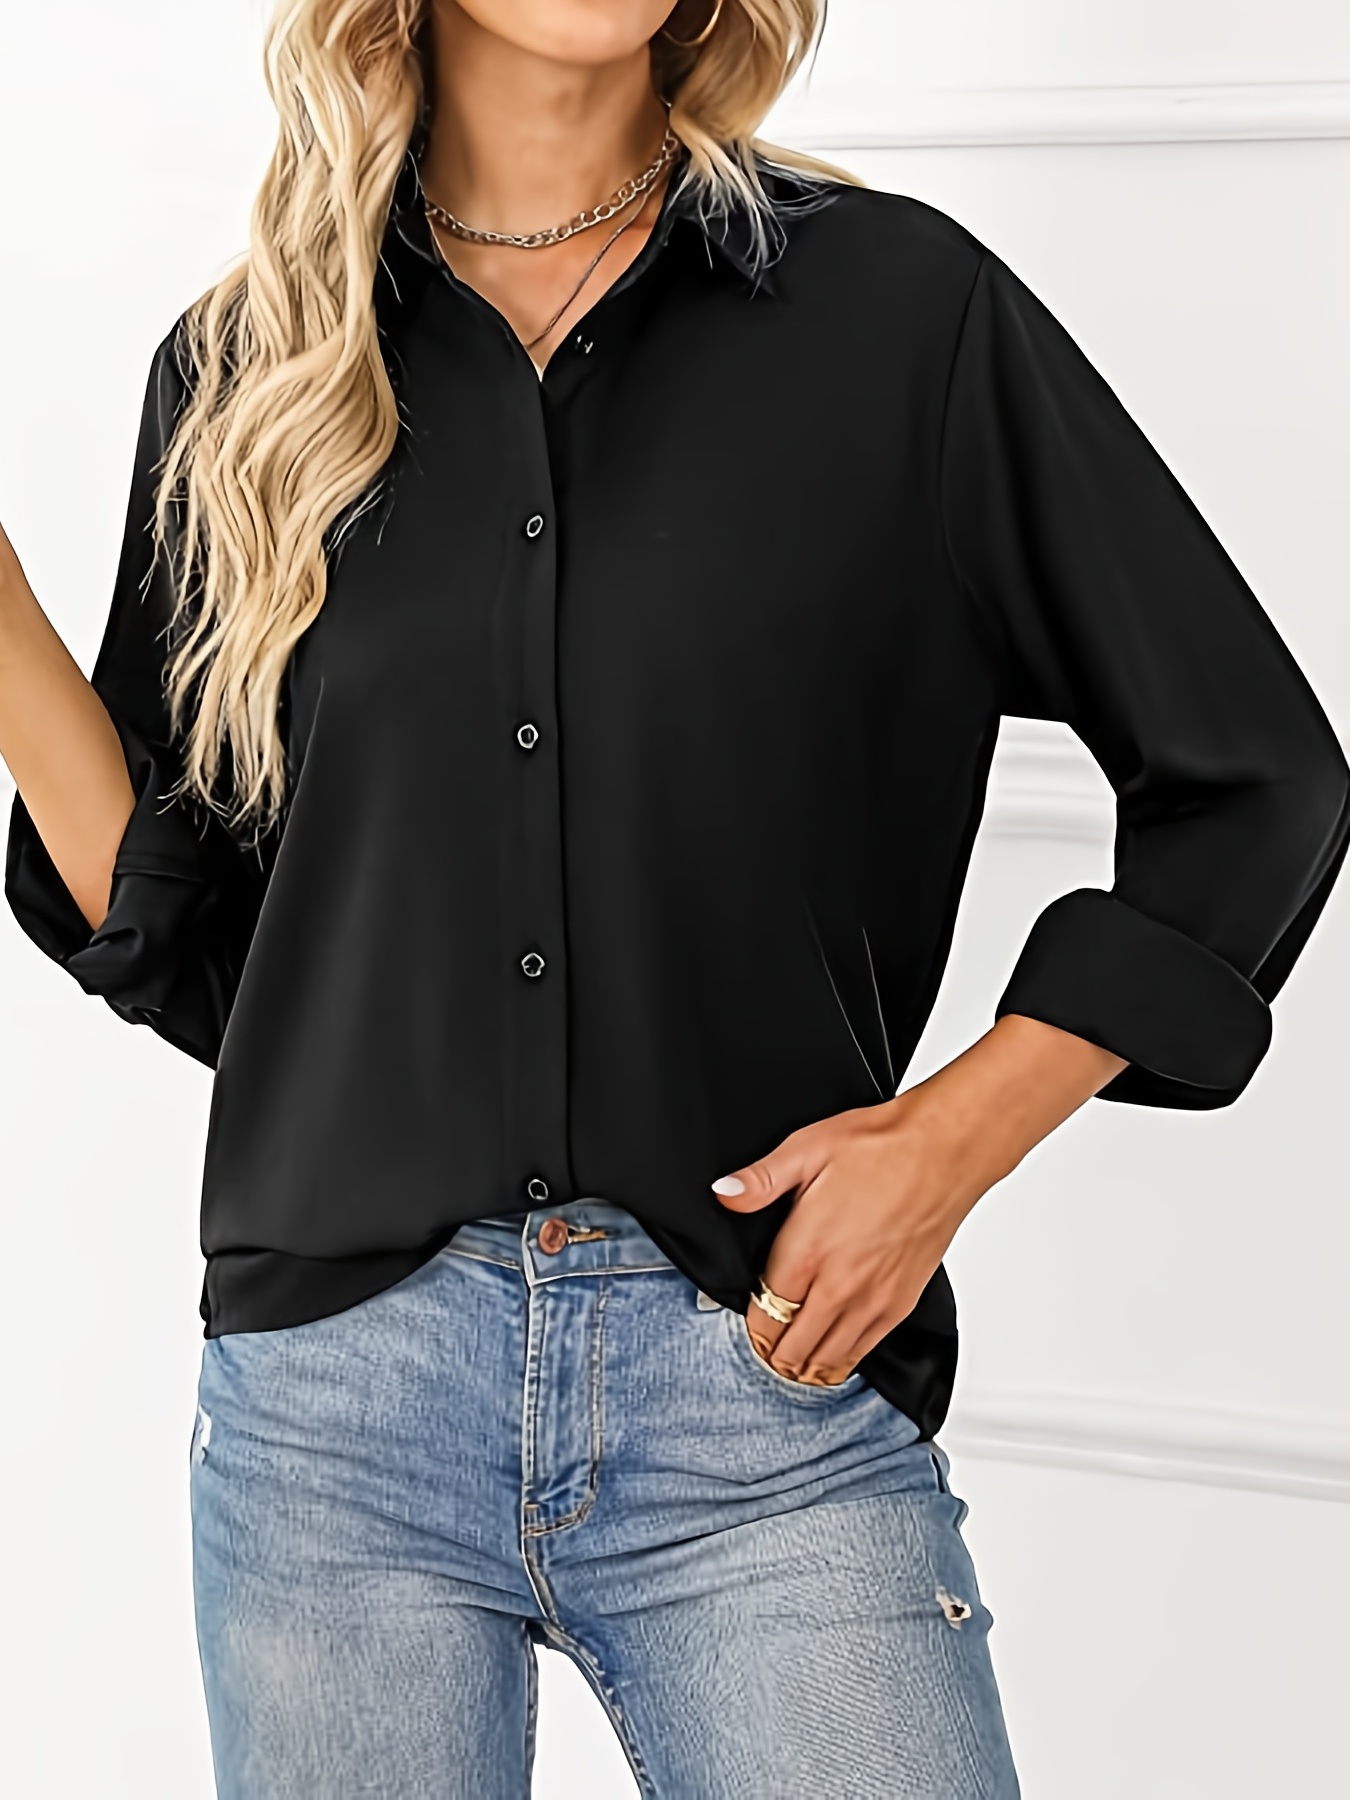 Women's See Through Blouse Lapel Long Sleeve Button-Down Loose